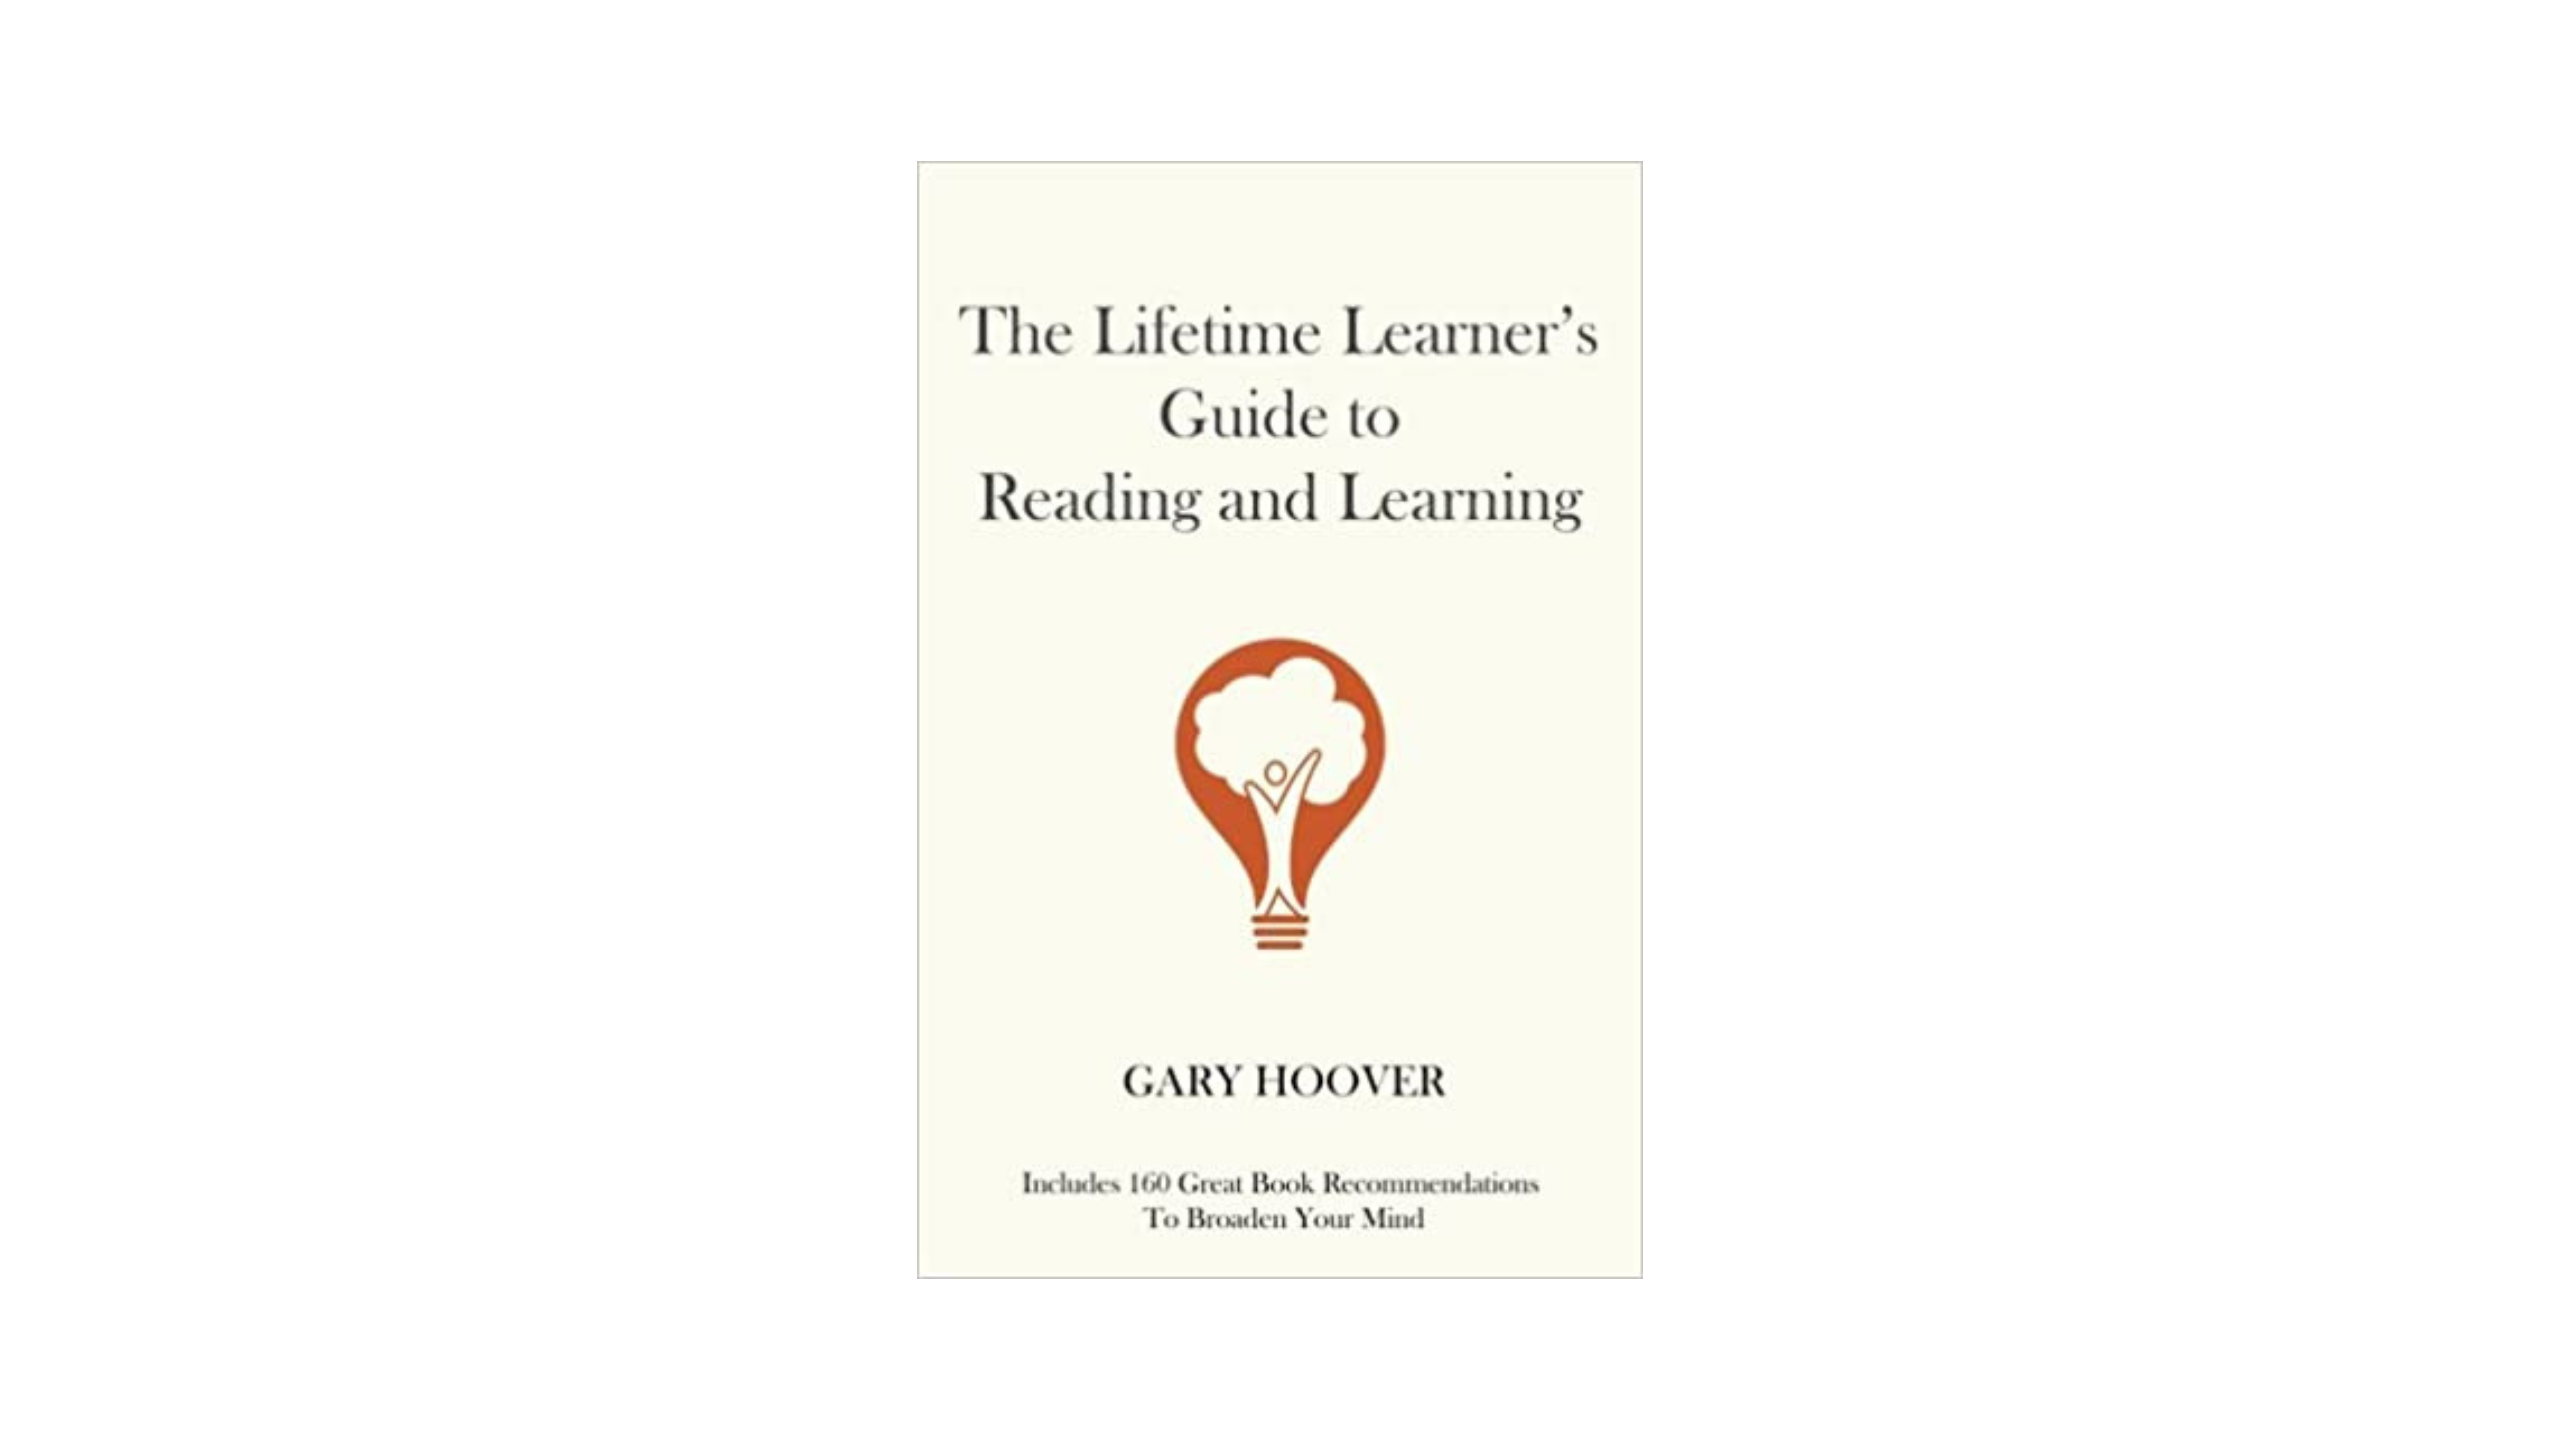 Book Notes: The Lifetime Learner’s Guide to Reading and Learning by Gary Hoover.